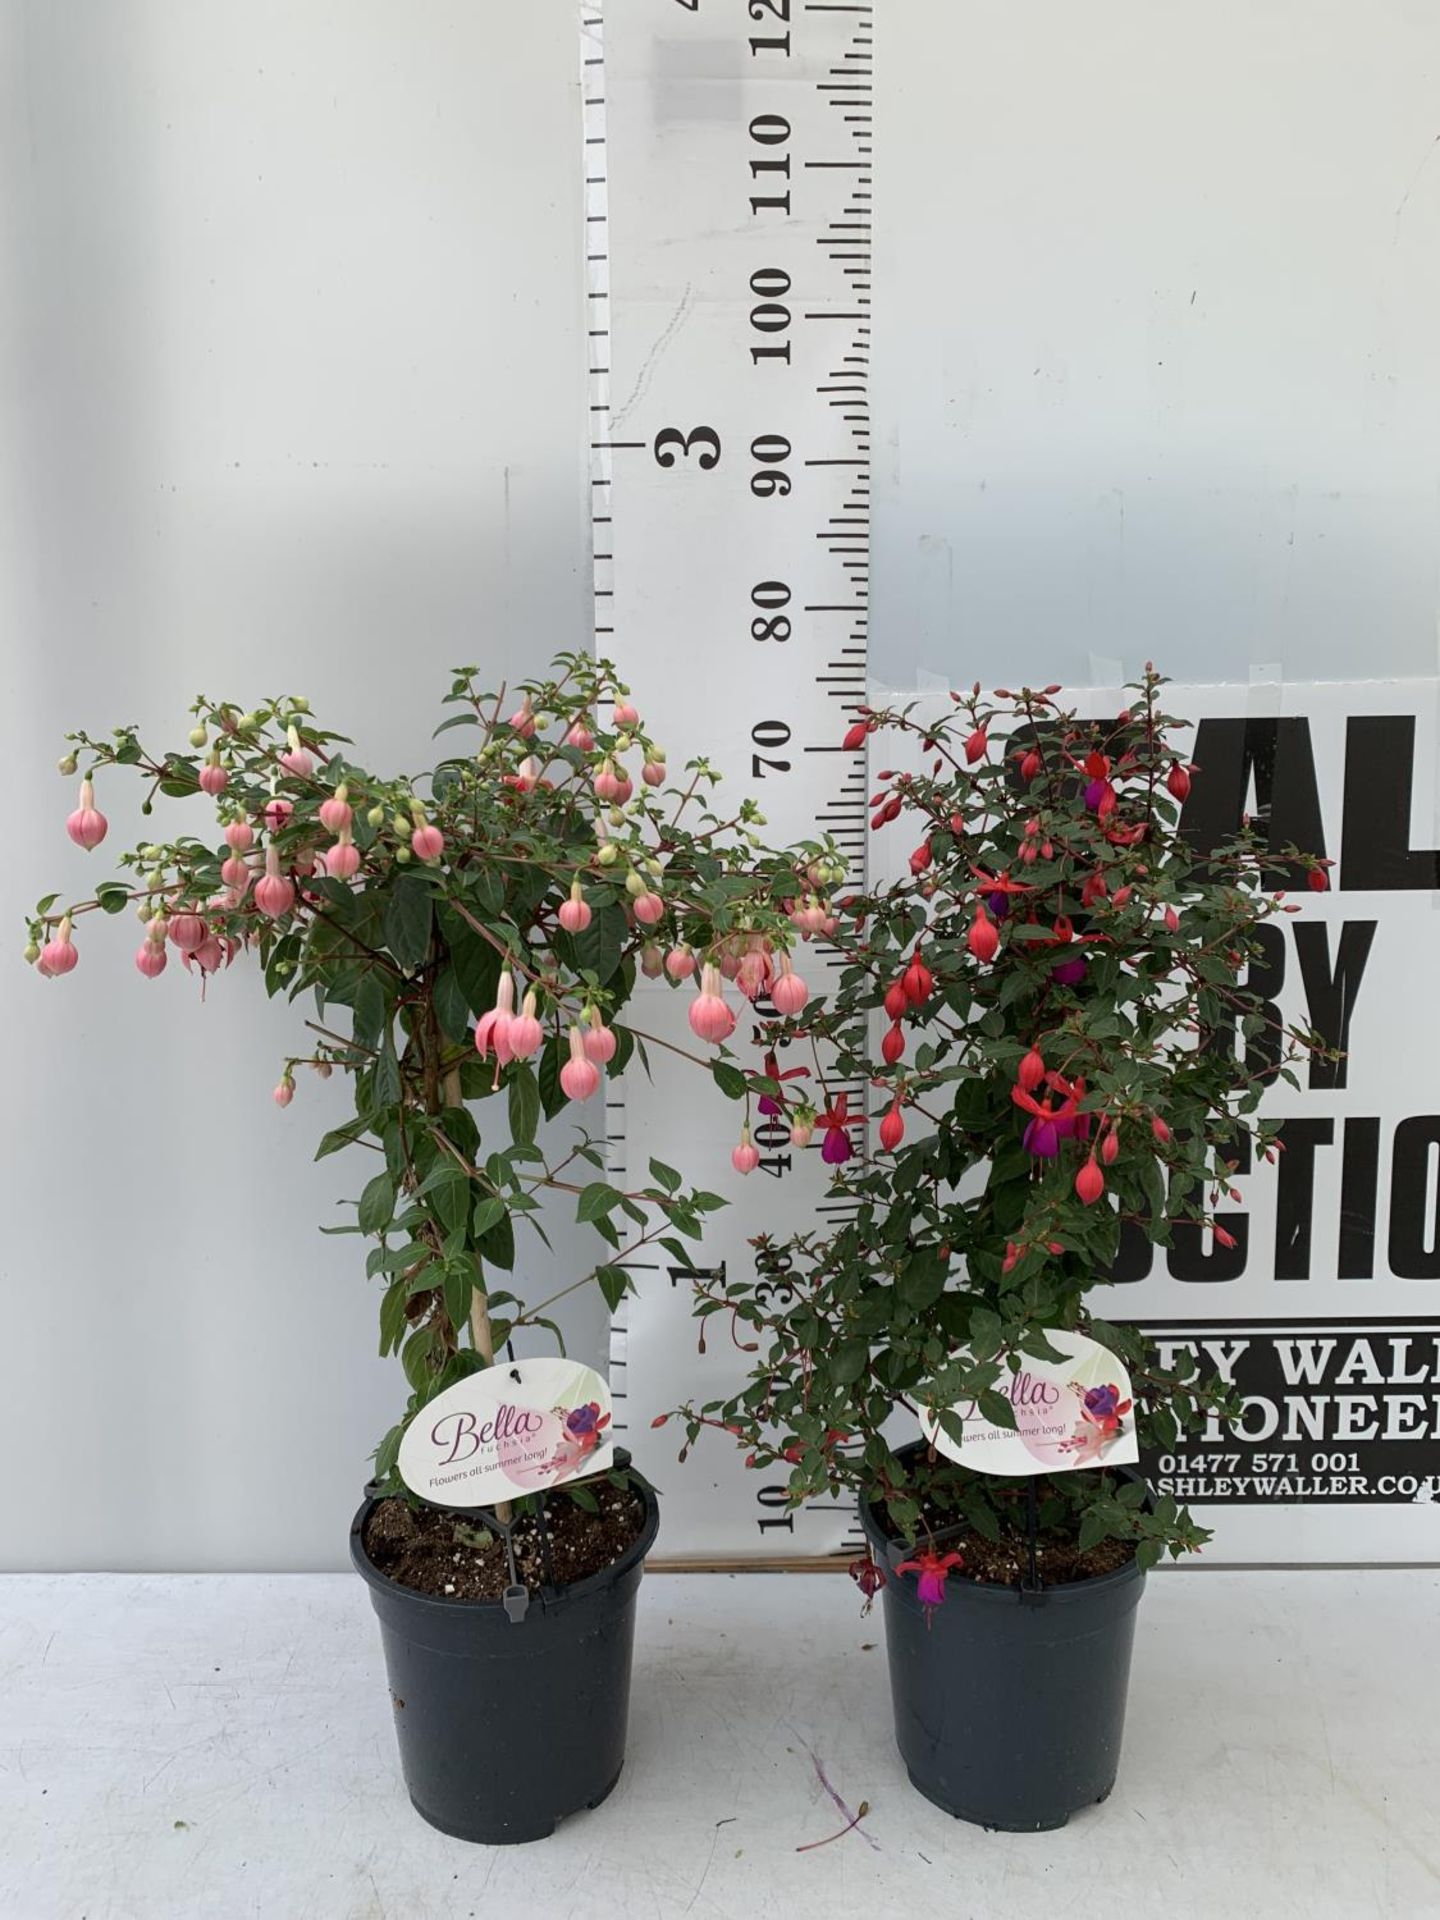 TWO BELLA STANDARD FUCHSIA IN A 3 LTR POTS 70CM -80CM TALL TO BE SOLD FOR THE TWO PLUS VAT